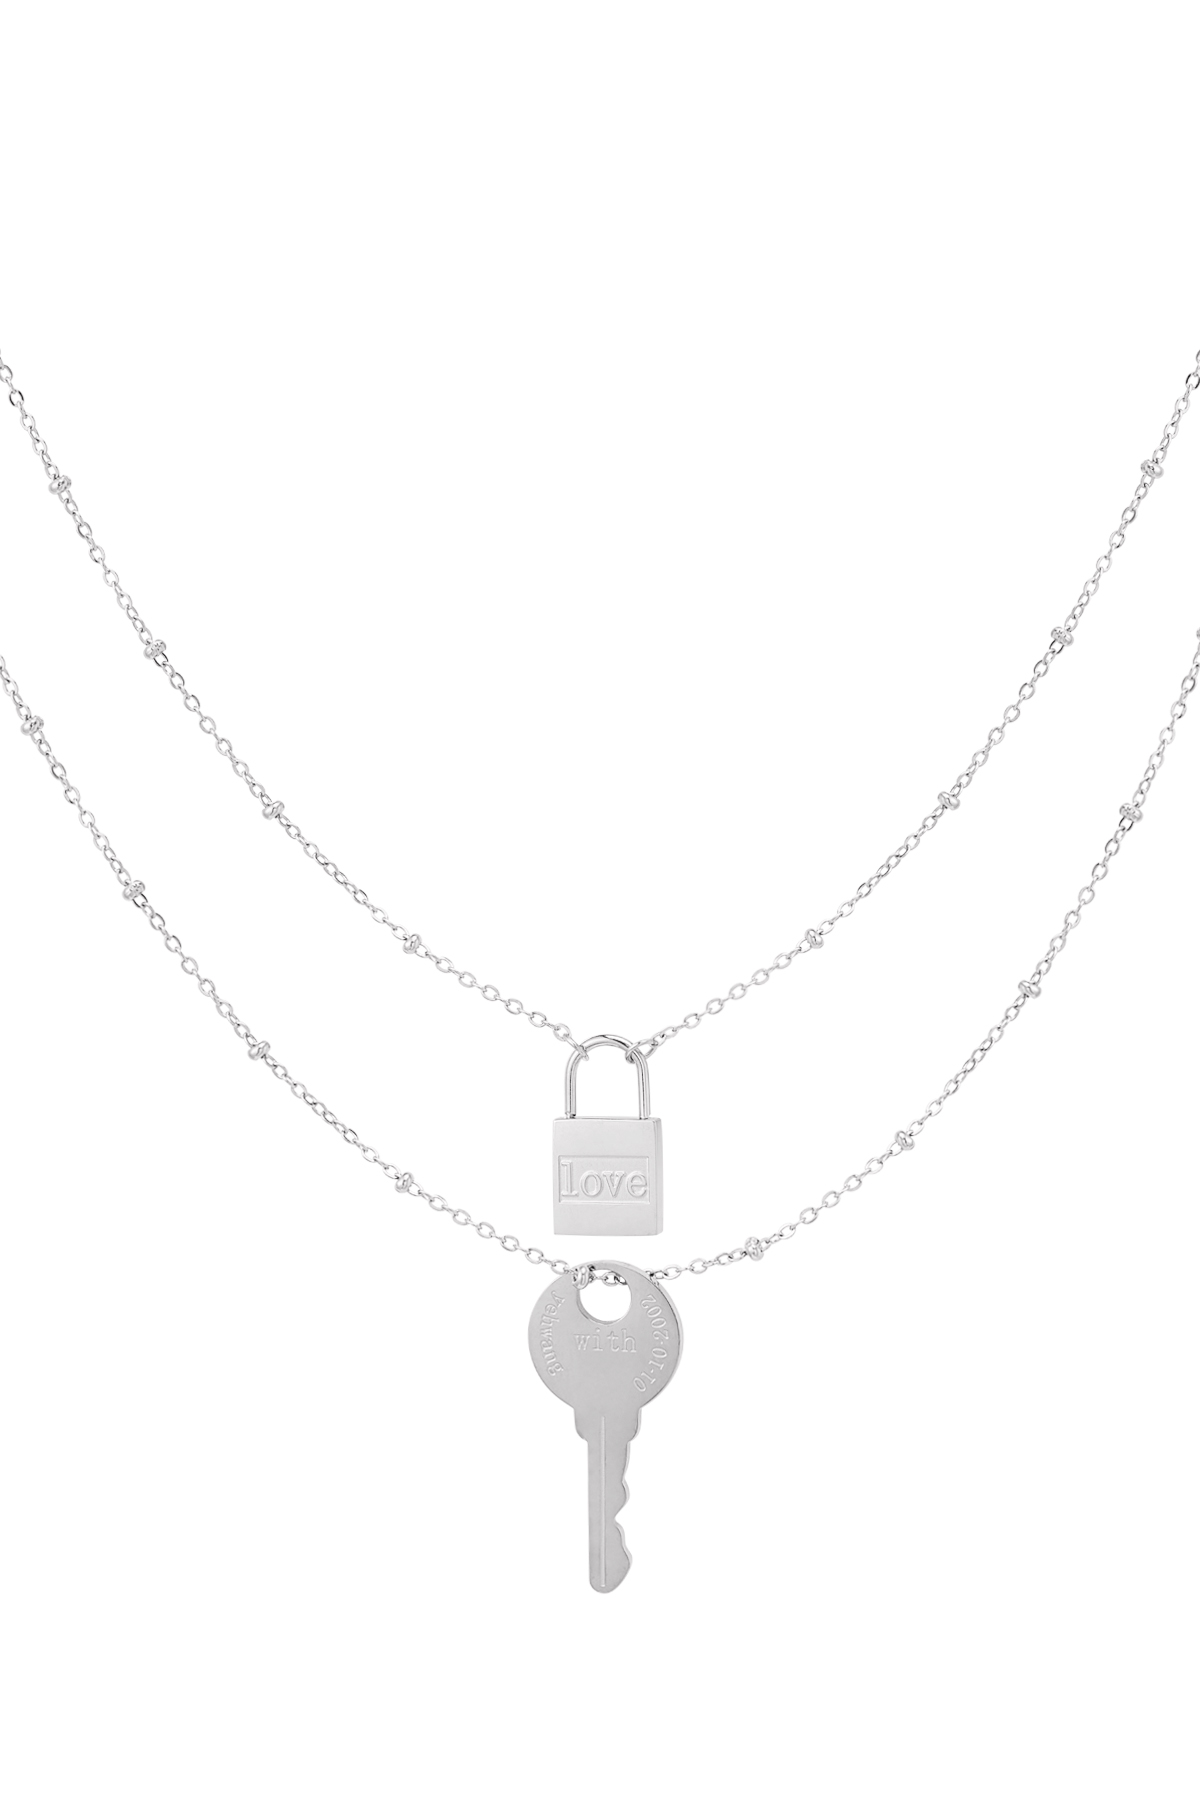 Double chain key and lock - silver Stainless Steel